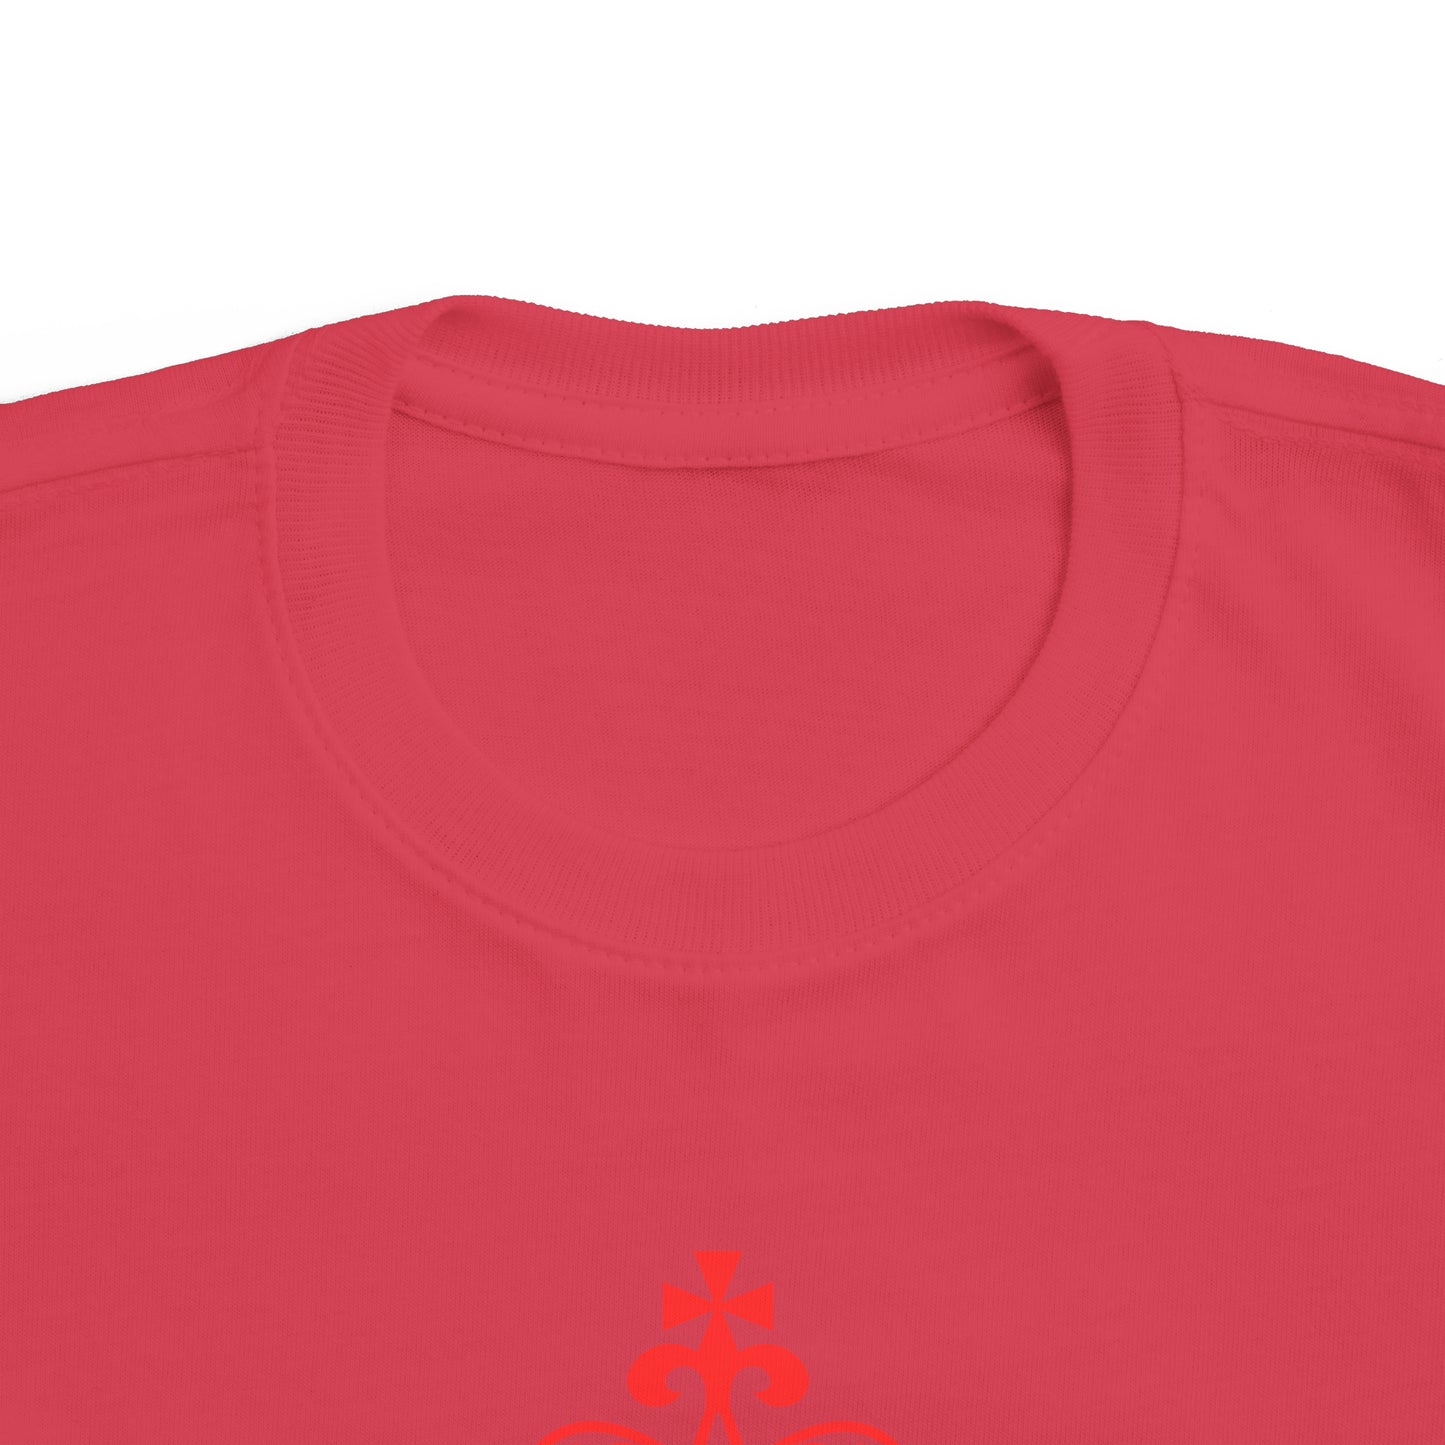 Red - Toddler's Fine Jersey Tee - Red Royal T